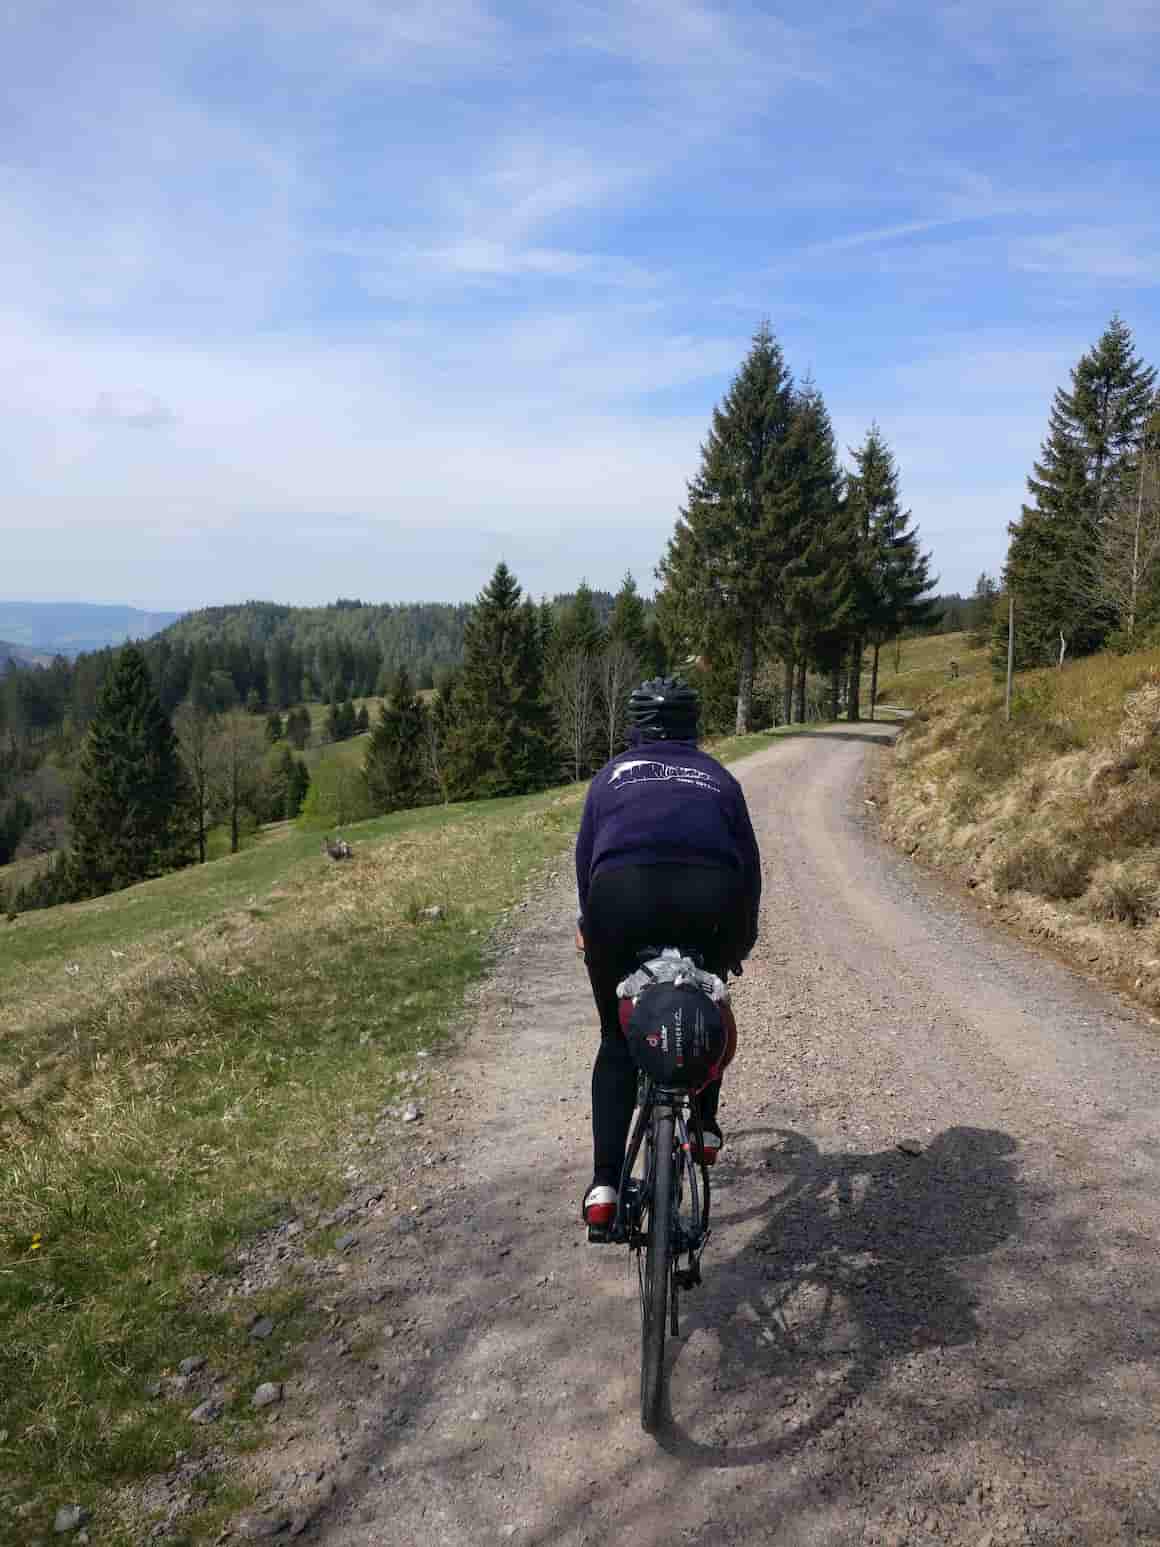 Cycling on the gravel road …